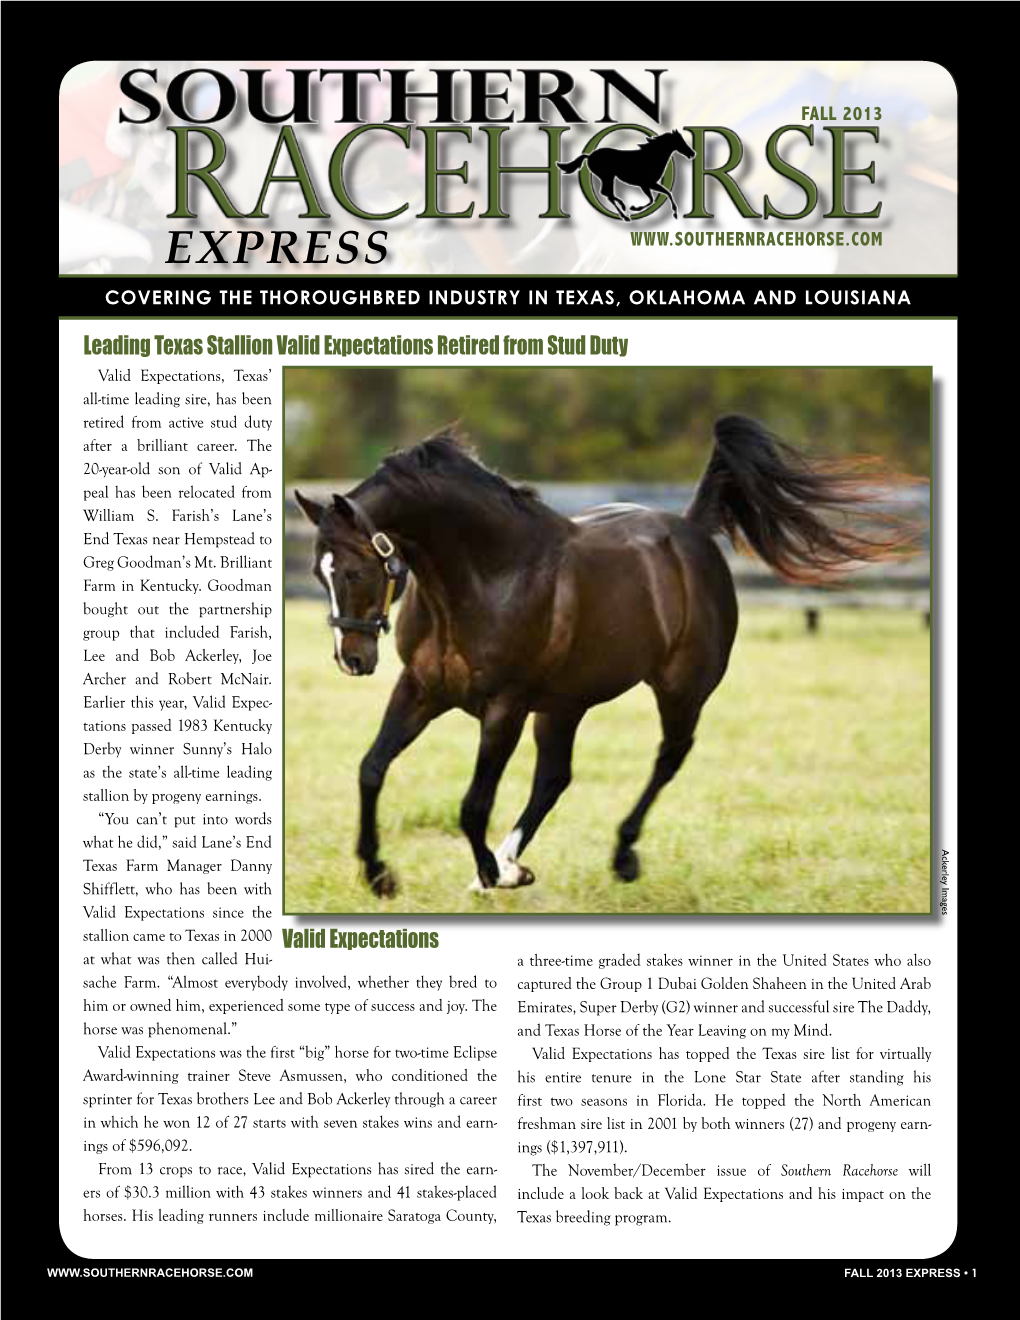 EXPRESS COVERING the THOROUGHBRED INDUSTRY in Texas, Oklahoma and Louisiana